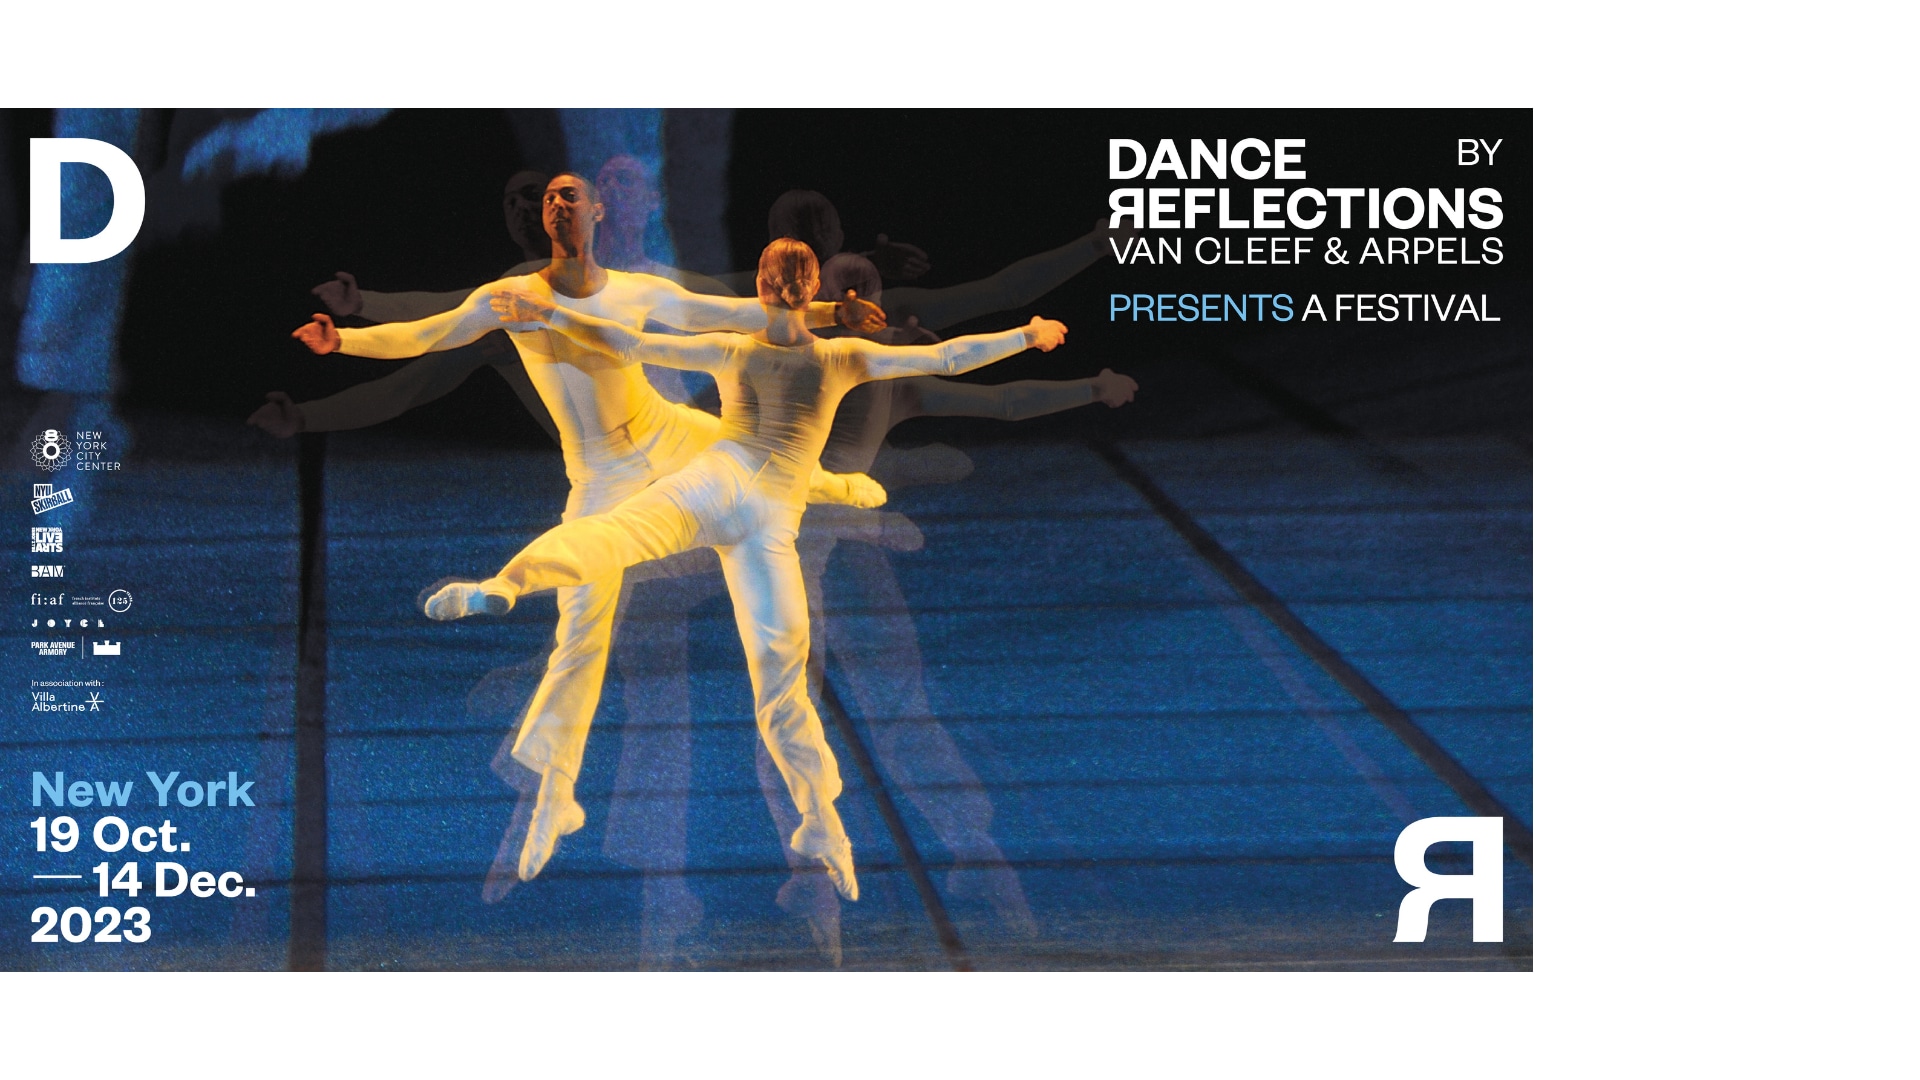 Poster of the festival Dance Reflections by Van Cleef & Arpels in NY